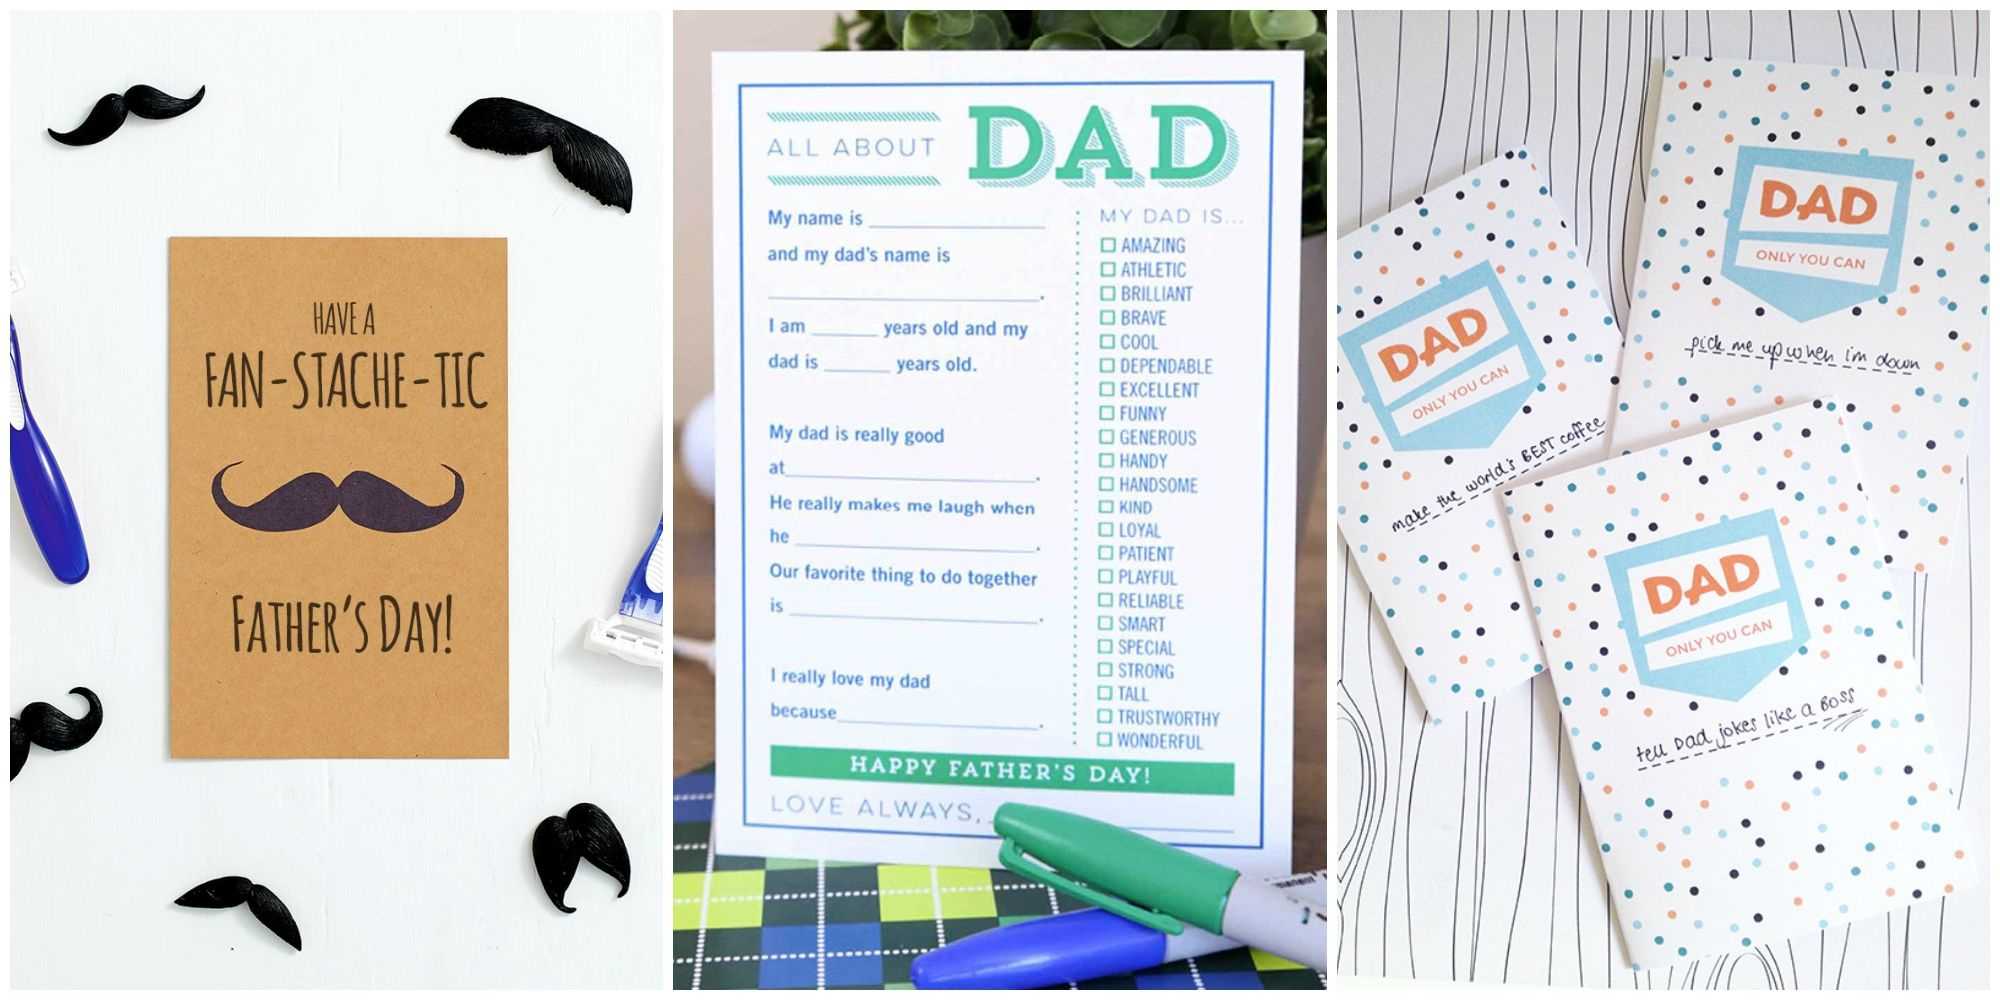 25 Printable Father's Day Cards – Free Printable Cards For With 52 Reasons Why I Love You Cards Templates Free